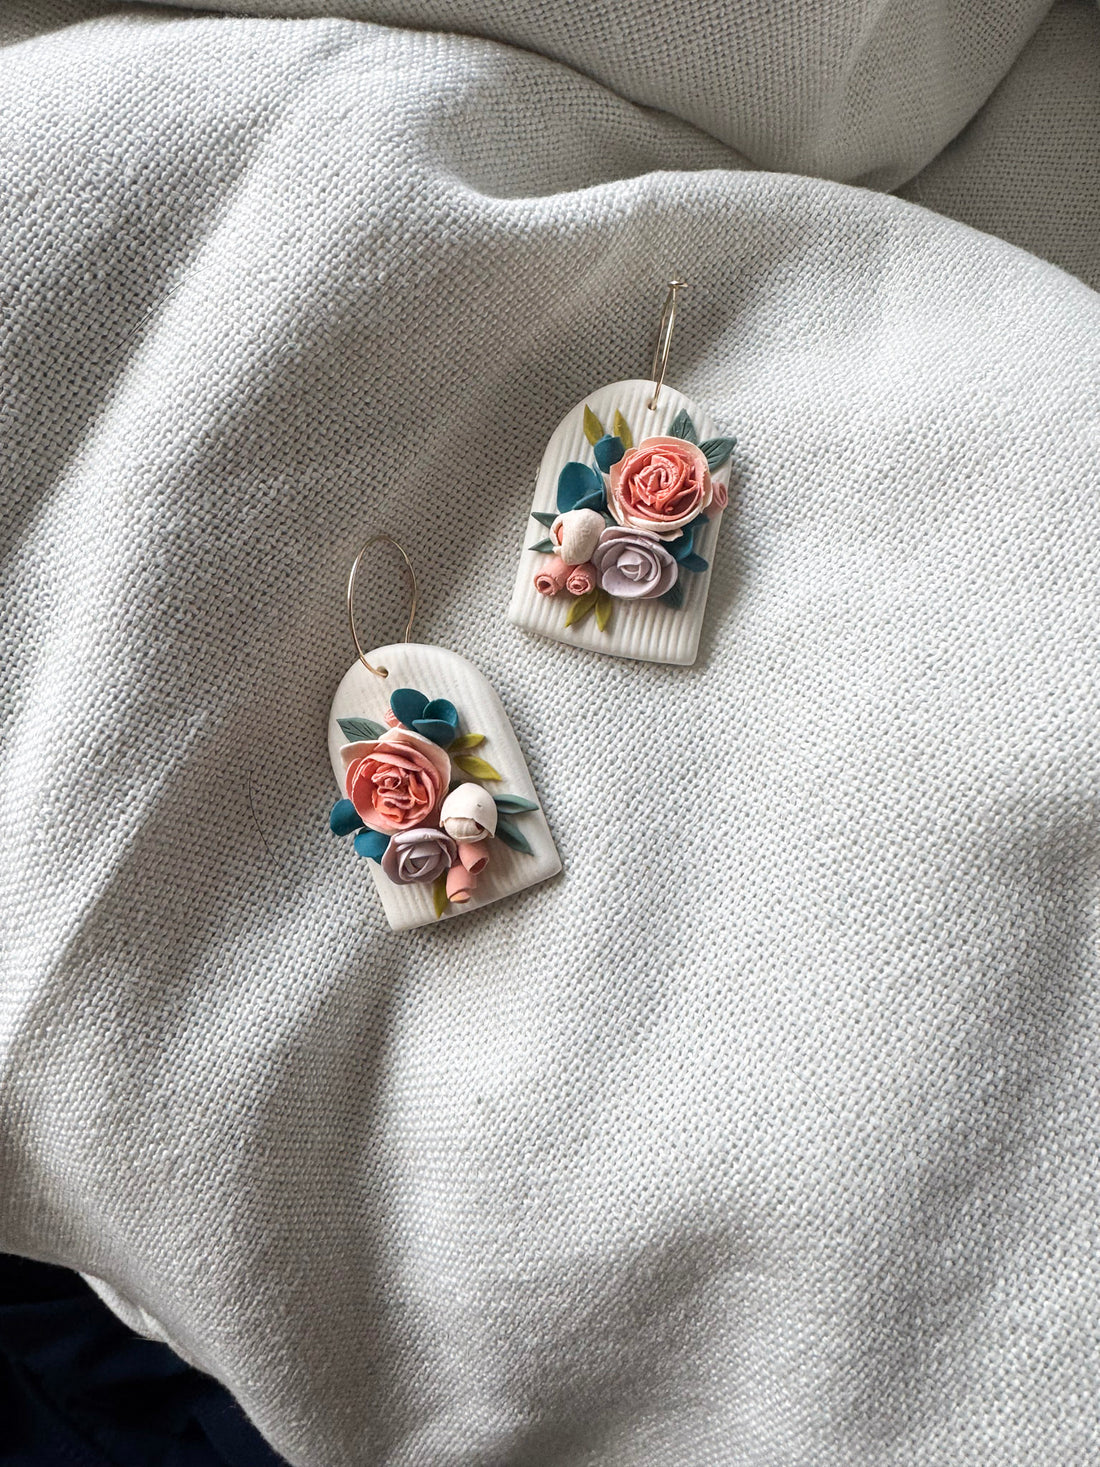 pair of arch-shaped floral earrings with peach and blue florals on a cream background